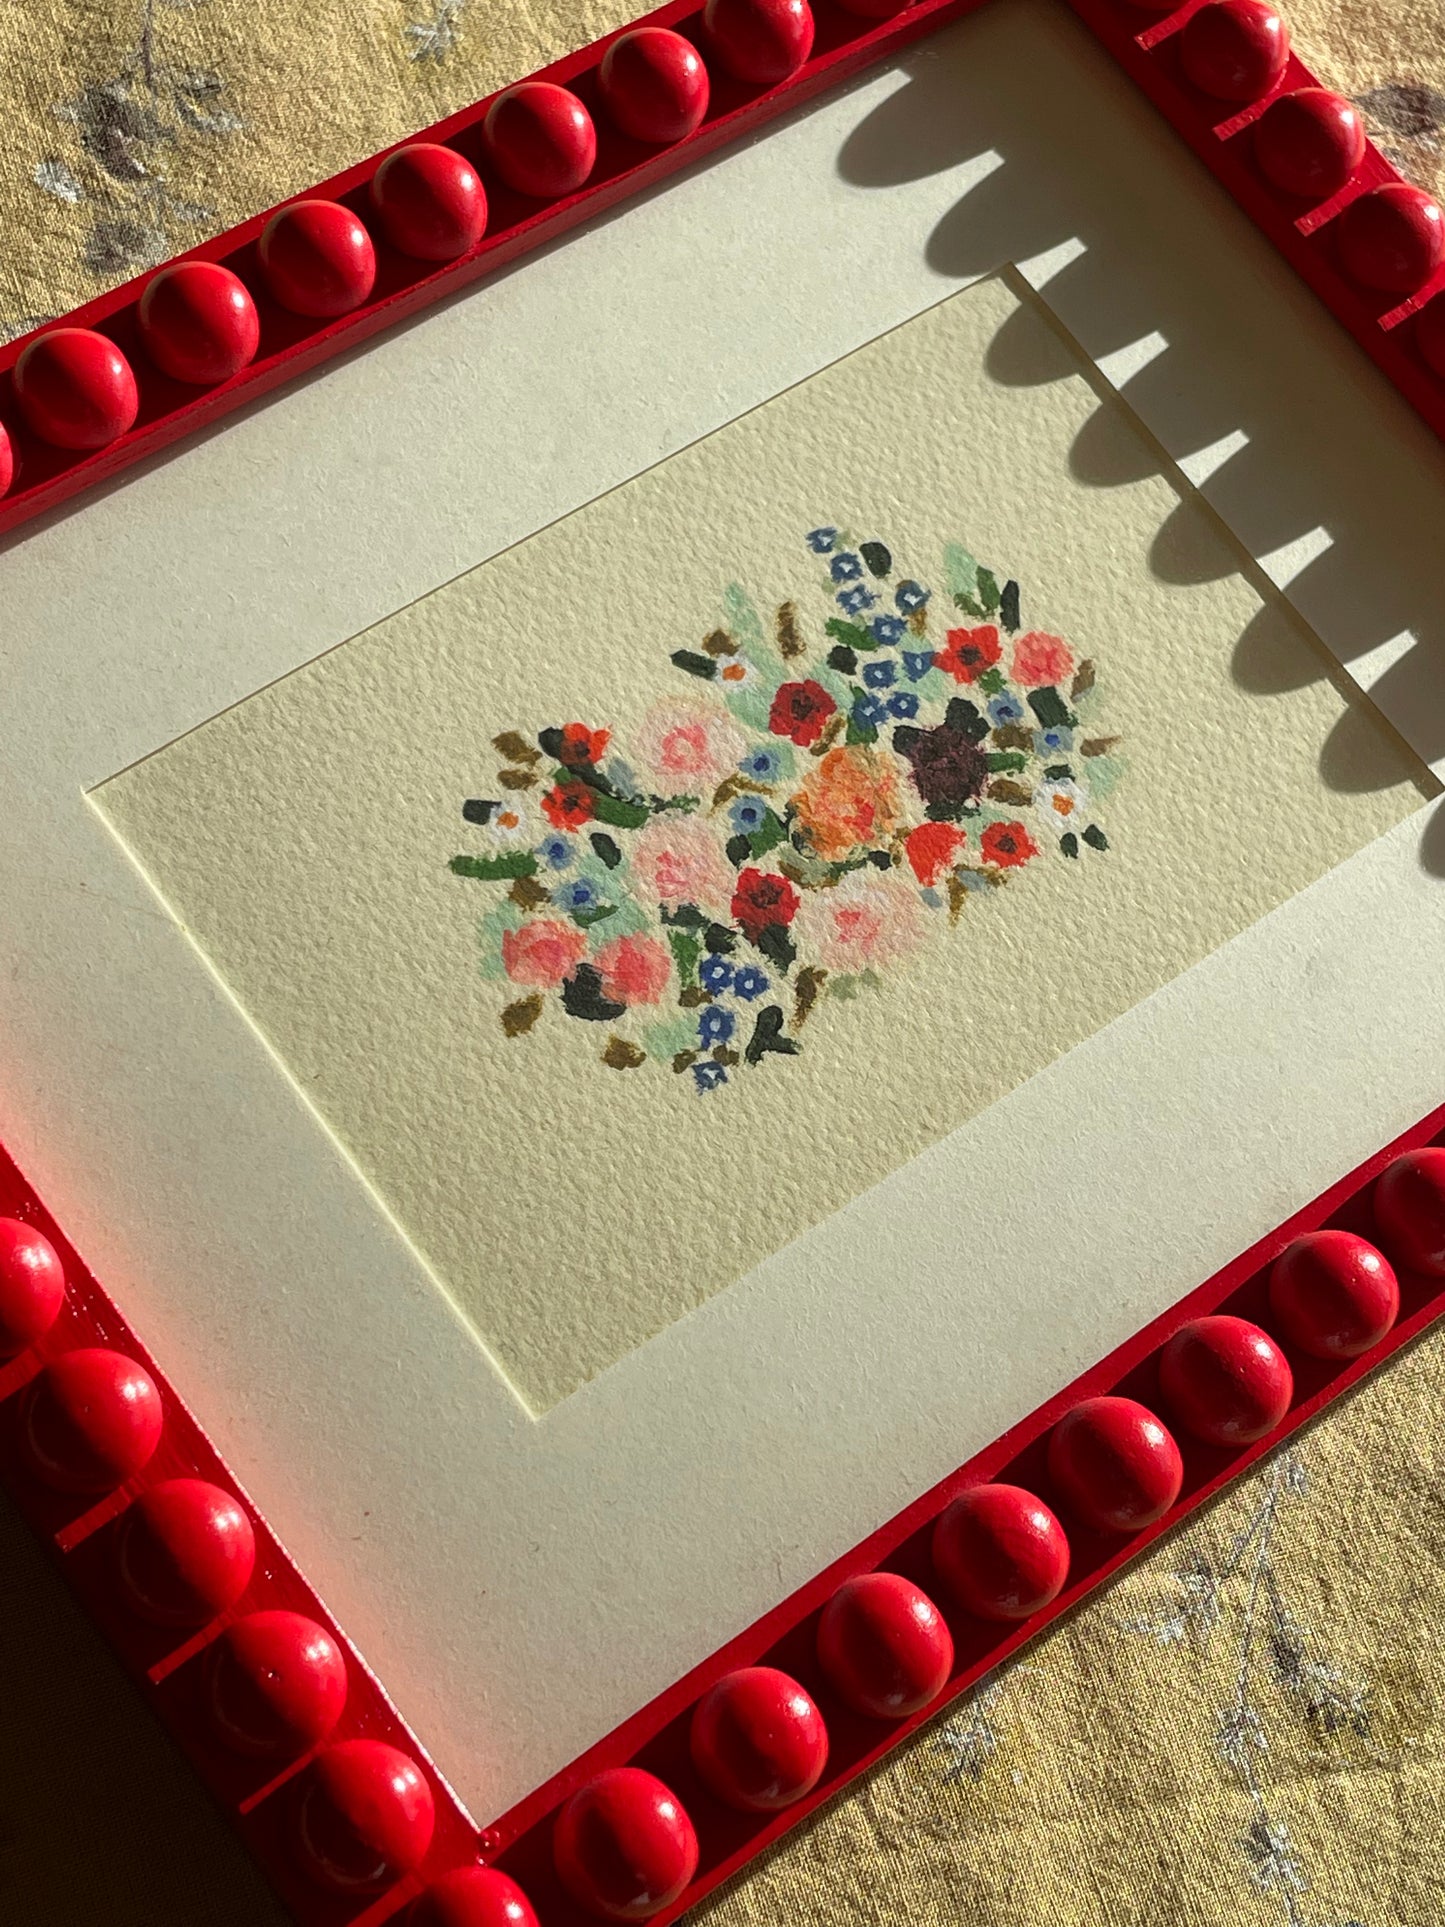 Red Handmade Bobbin Frame with Brittany Smith Wildflower Giclee Print